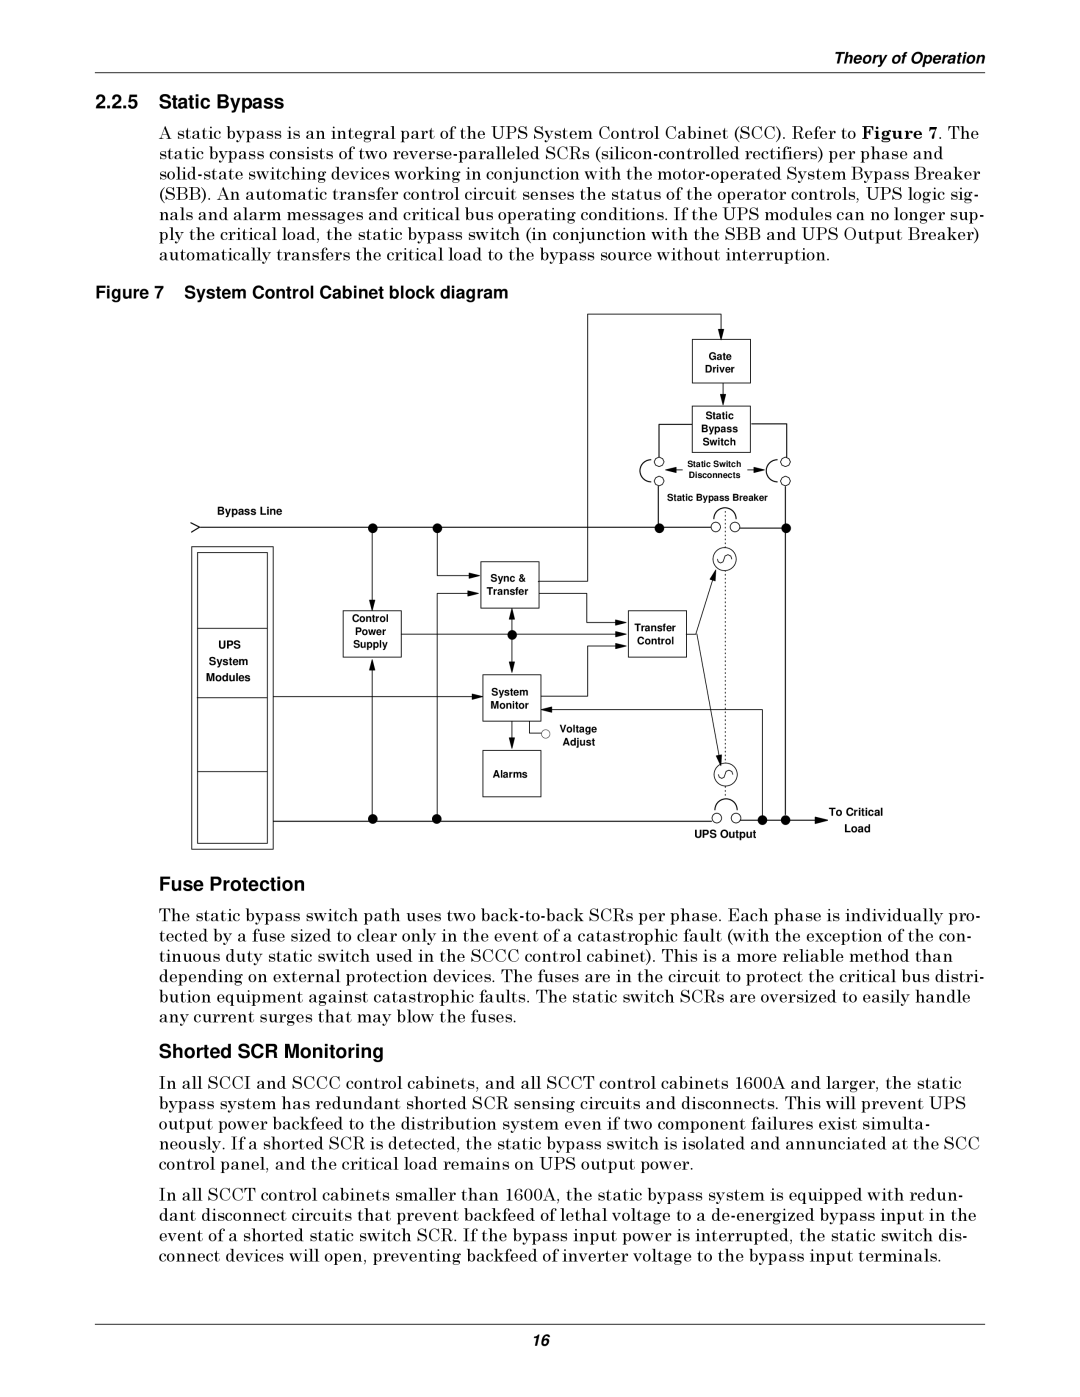 Emerson Series 610 manual Static Bypass, Fuse Protection, Shorted SCR Monitoring, System Control Cabinet block diagram 